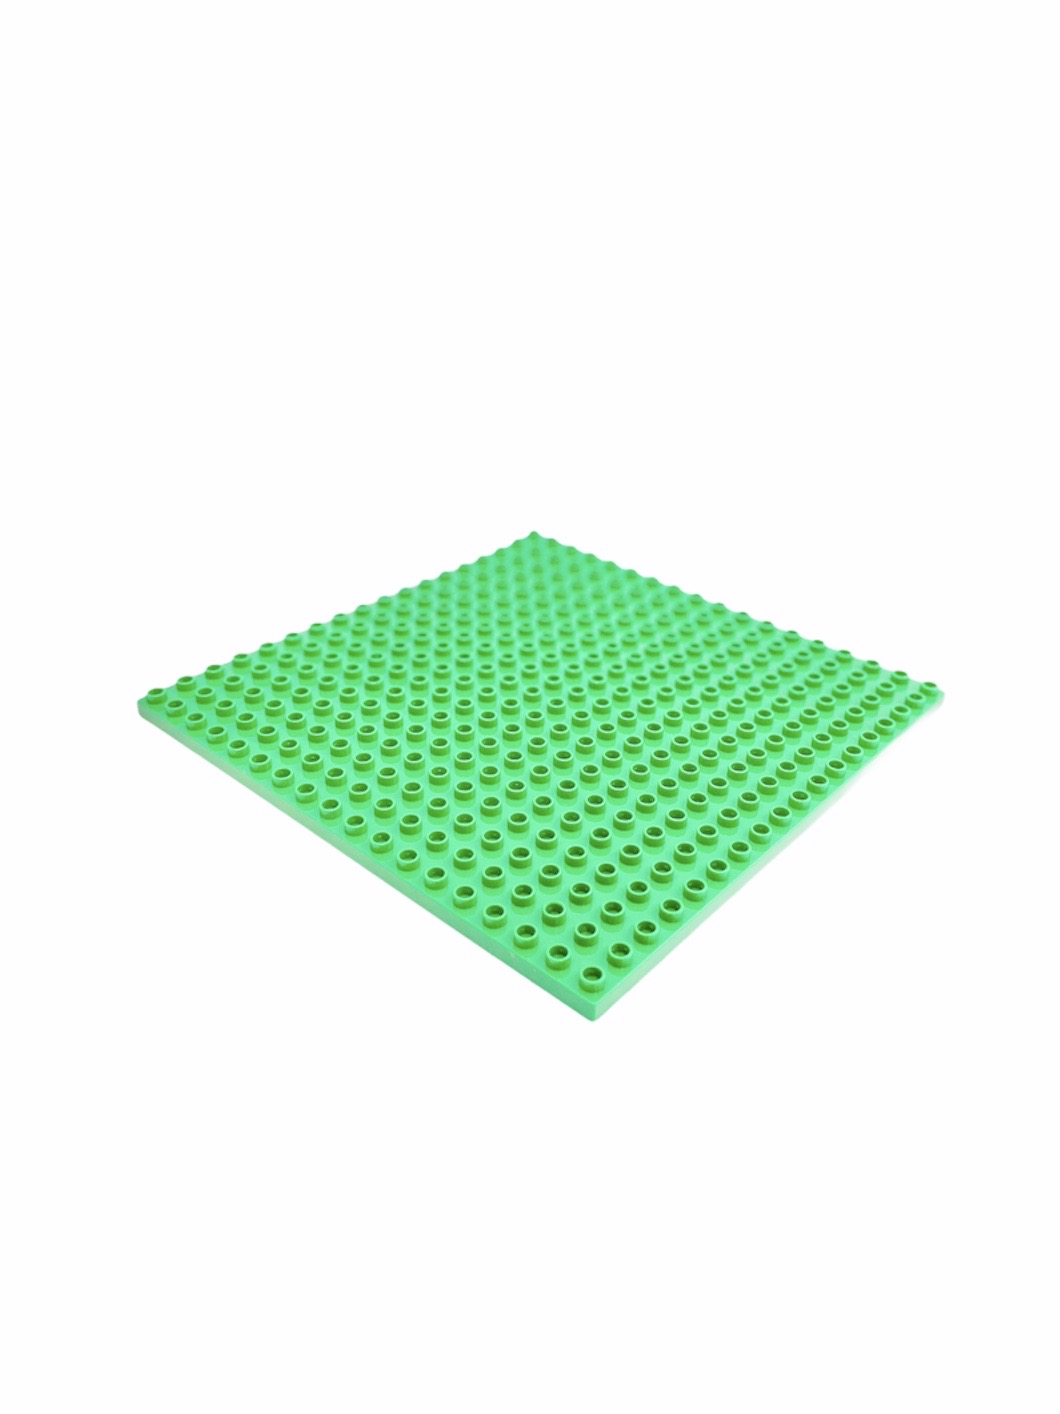 Coko Bricks Base Plate - Large in green on white background